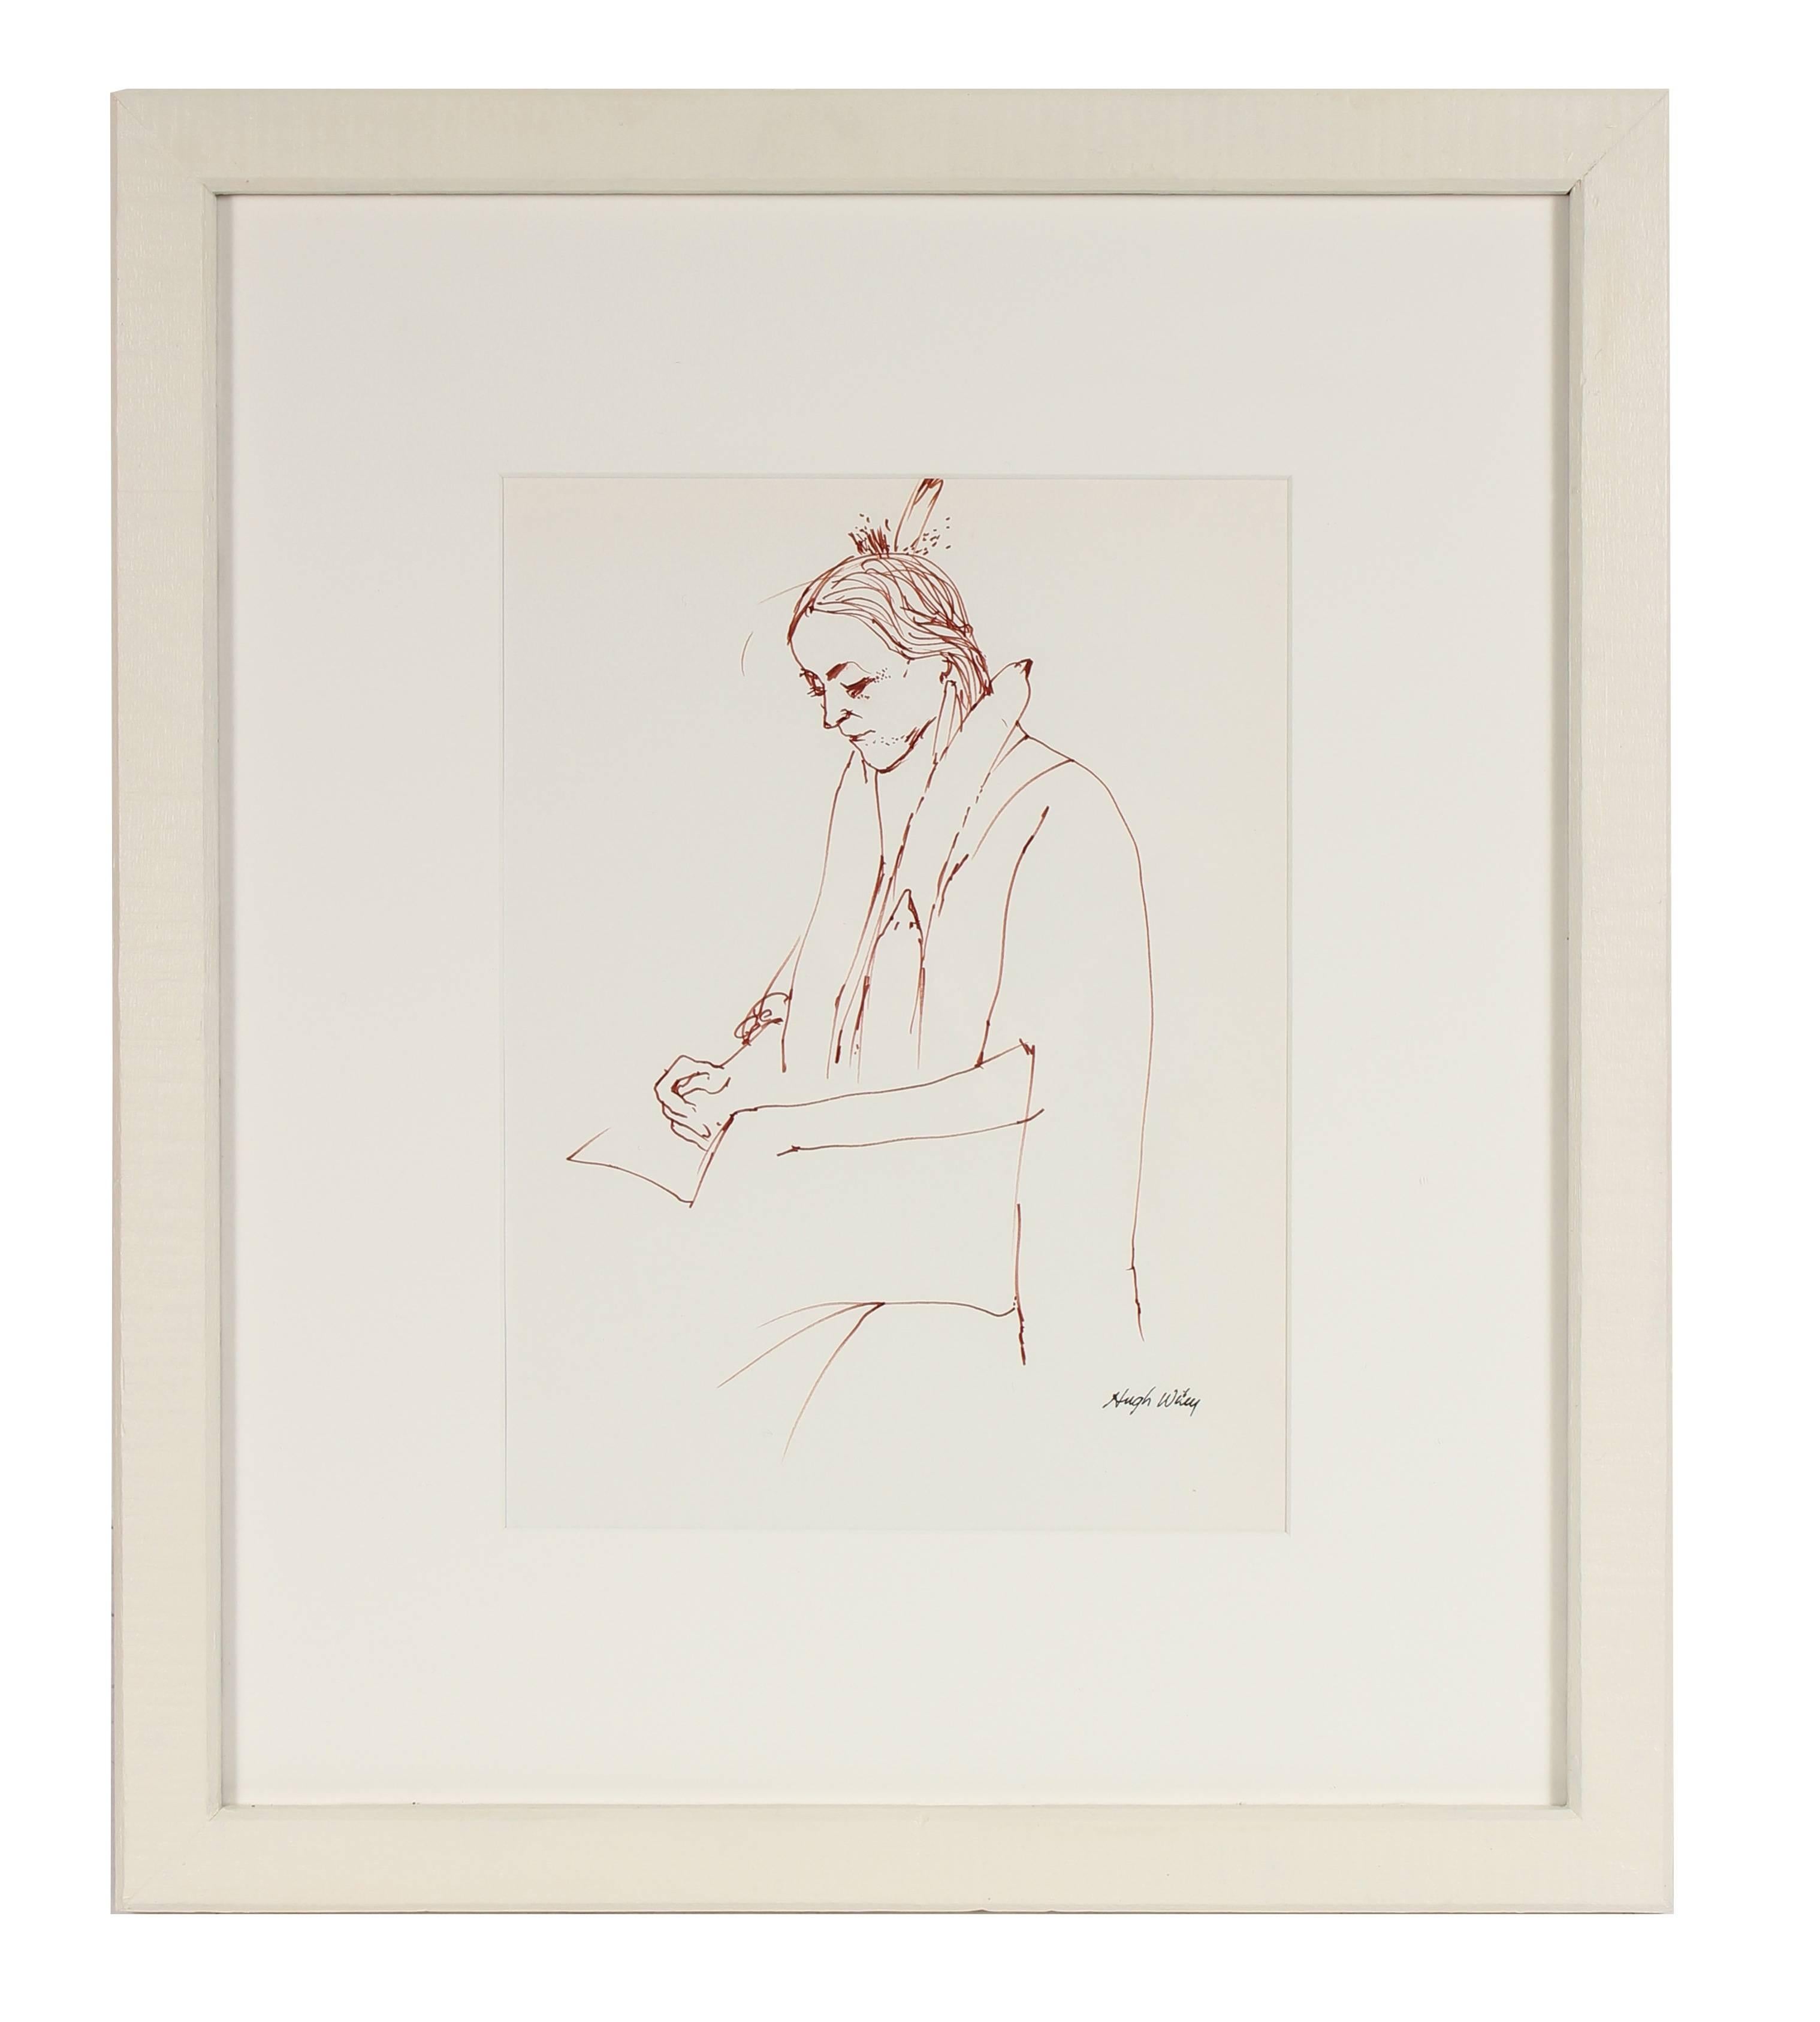 This 1974 brown ink on paper portrait of a seated woman is by Northern California artist Hugh Wiley (1922-2013).  Wiley studied at the Pennsylvania Academy of the Fine Arts and in Mexico City under Carlos Merida. He showed at the NYC Bertha